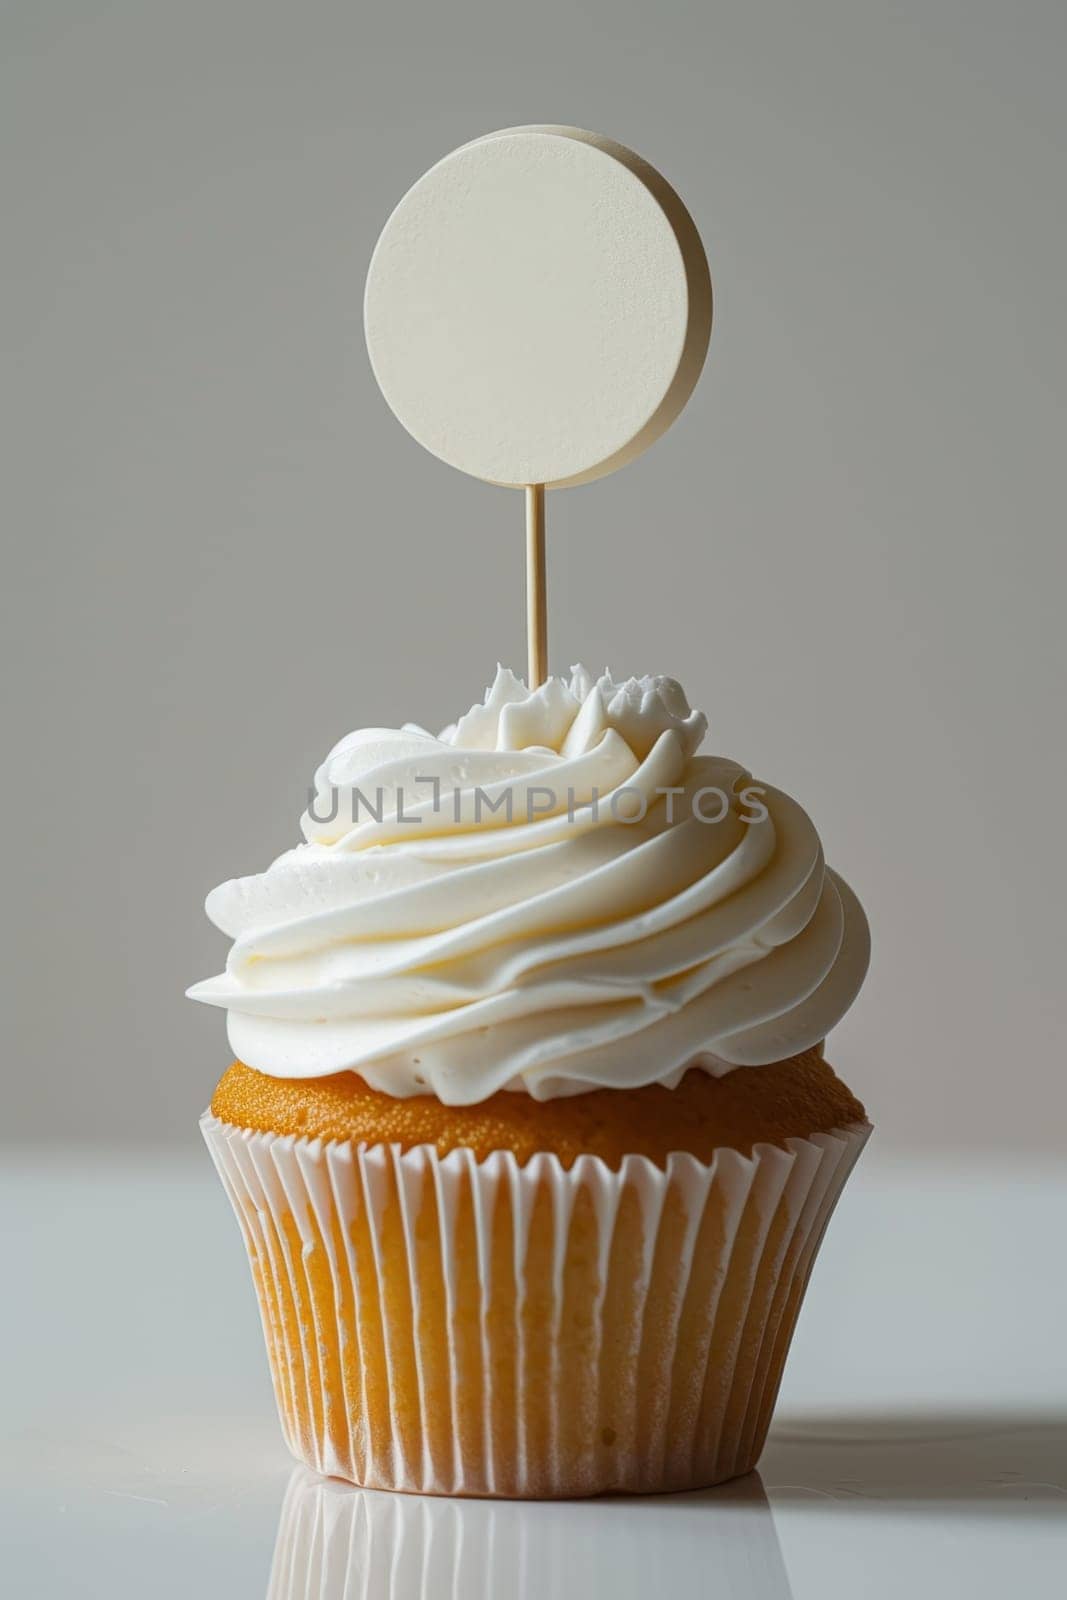 Cupcake with white cream and an inscription plate on a white background.